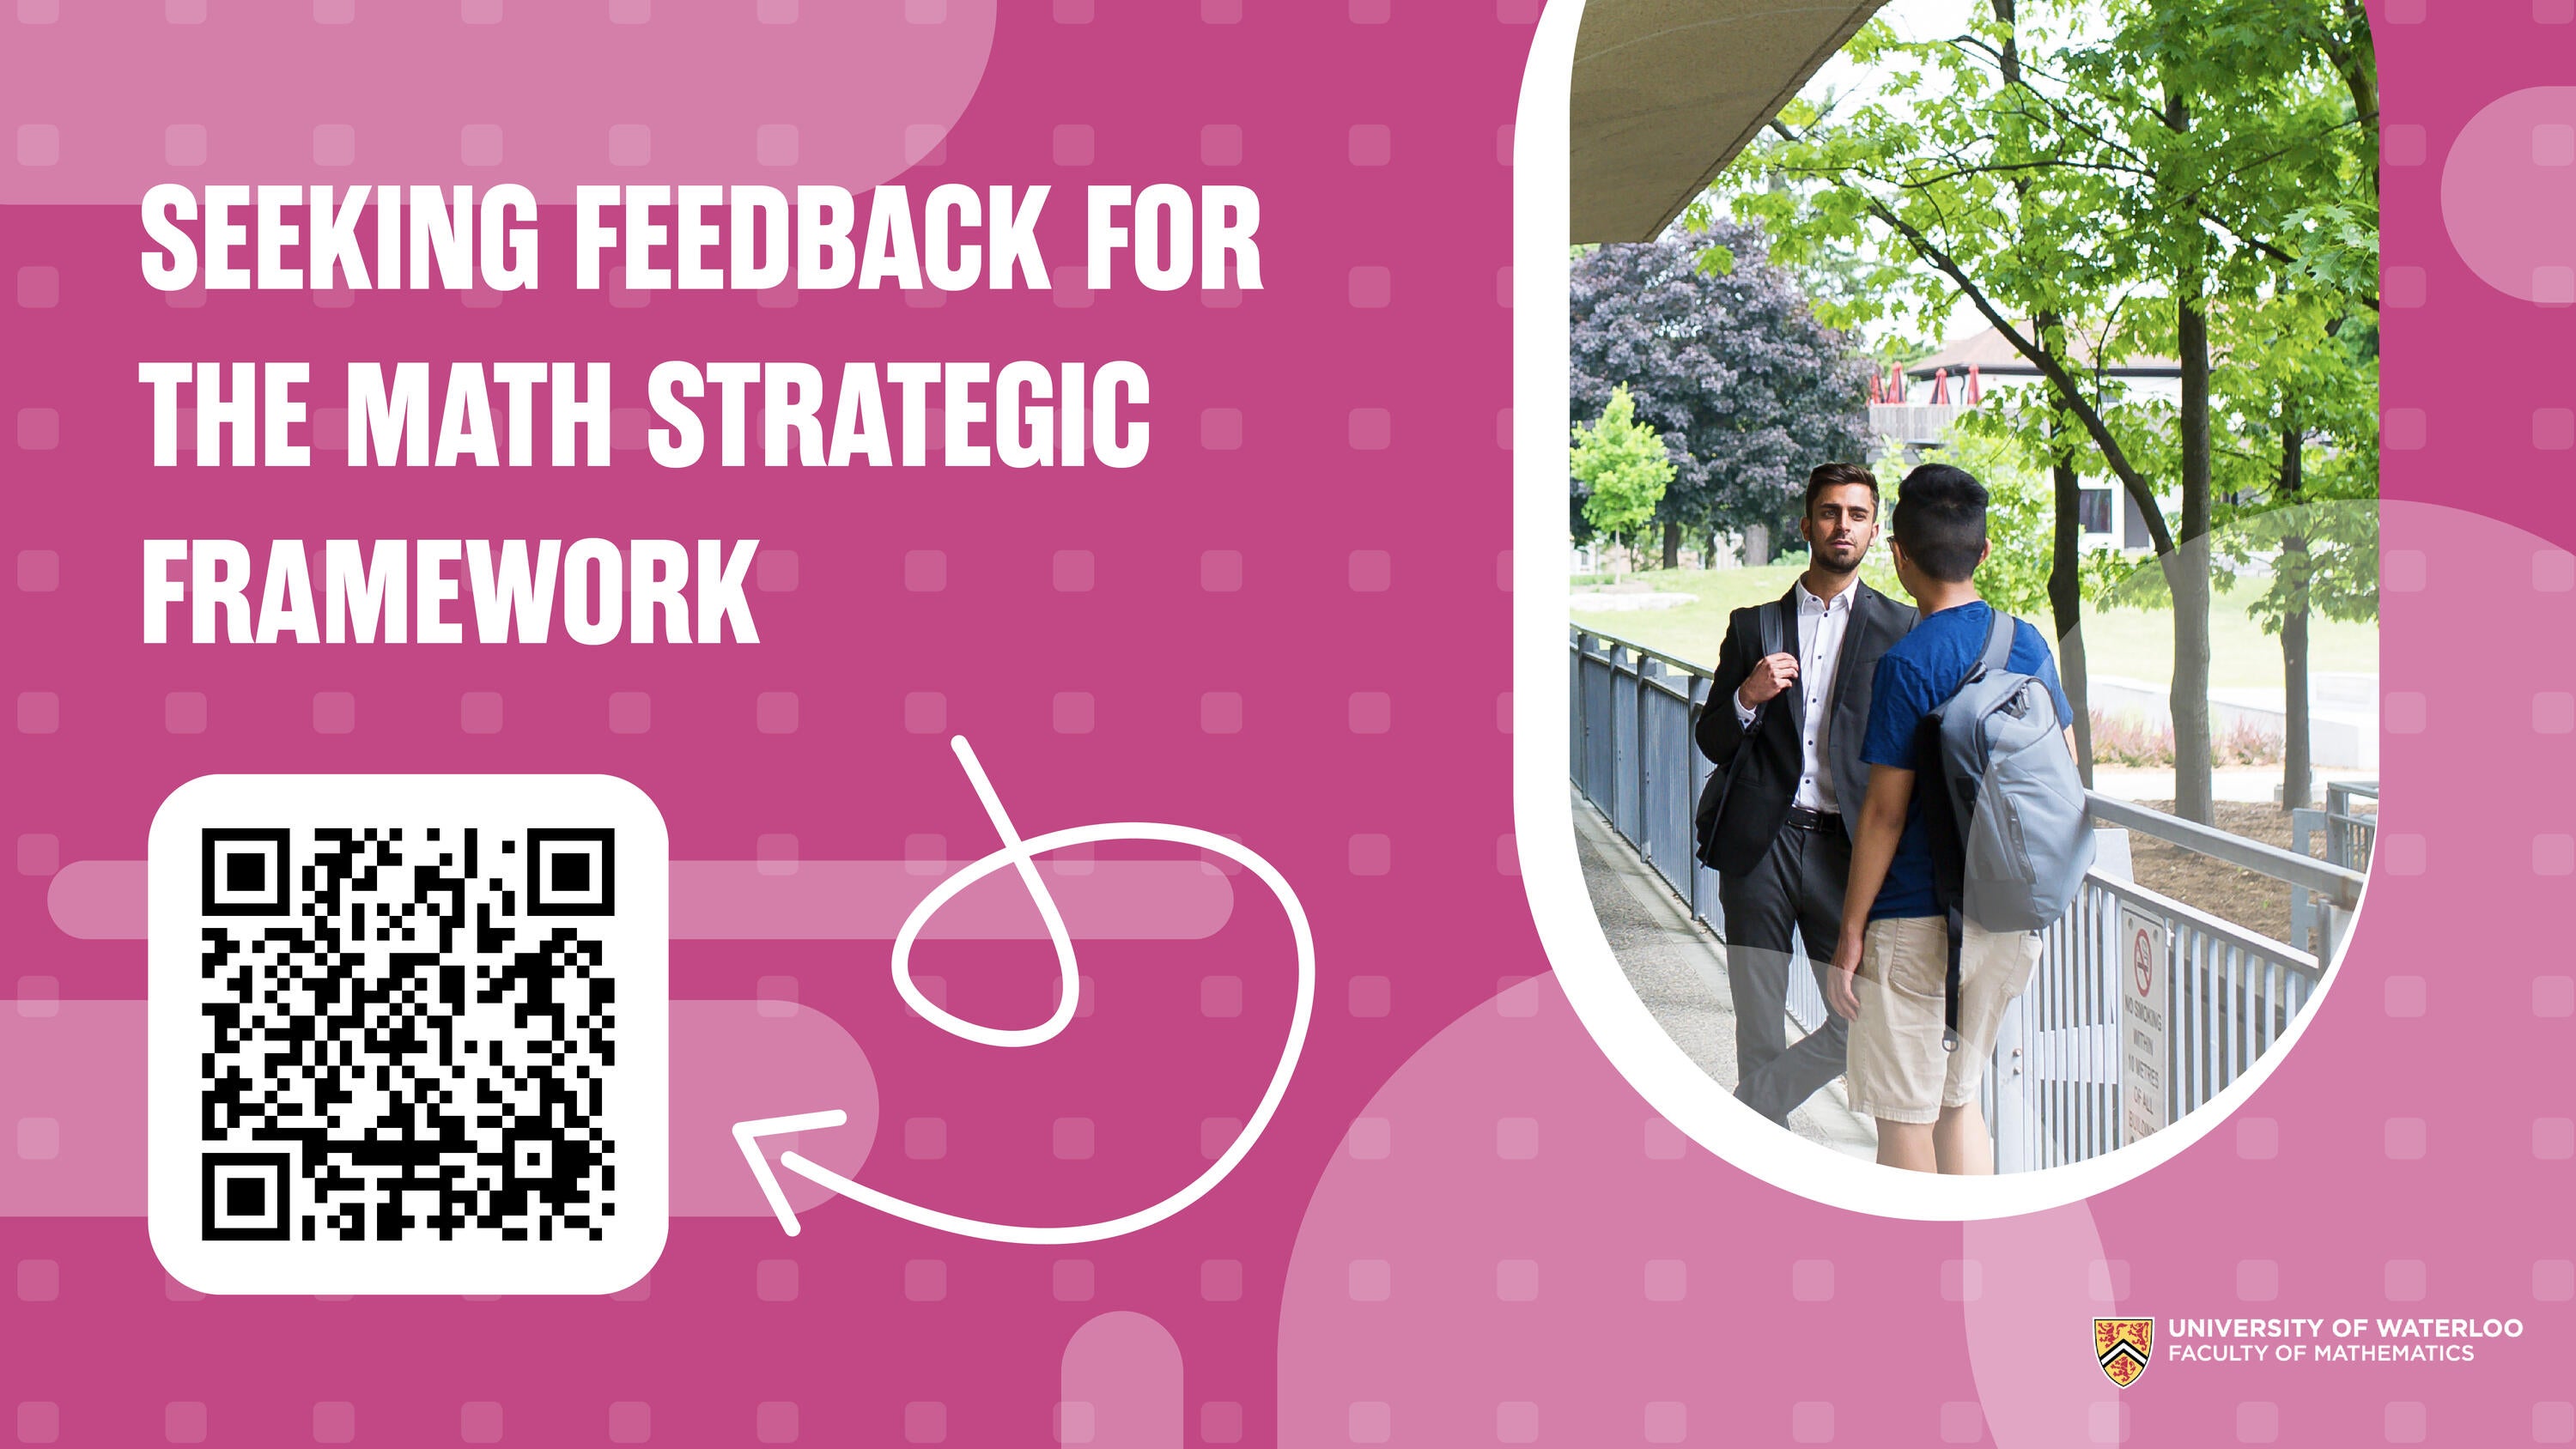 An infographic witht he text "Seeking feedback for the Math Strategic Framework," and a QR code.